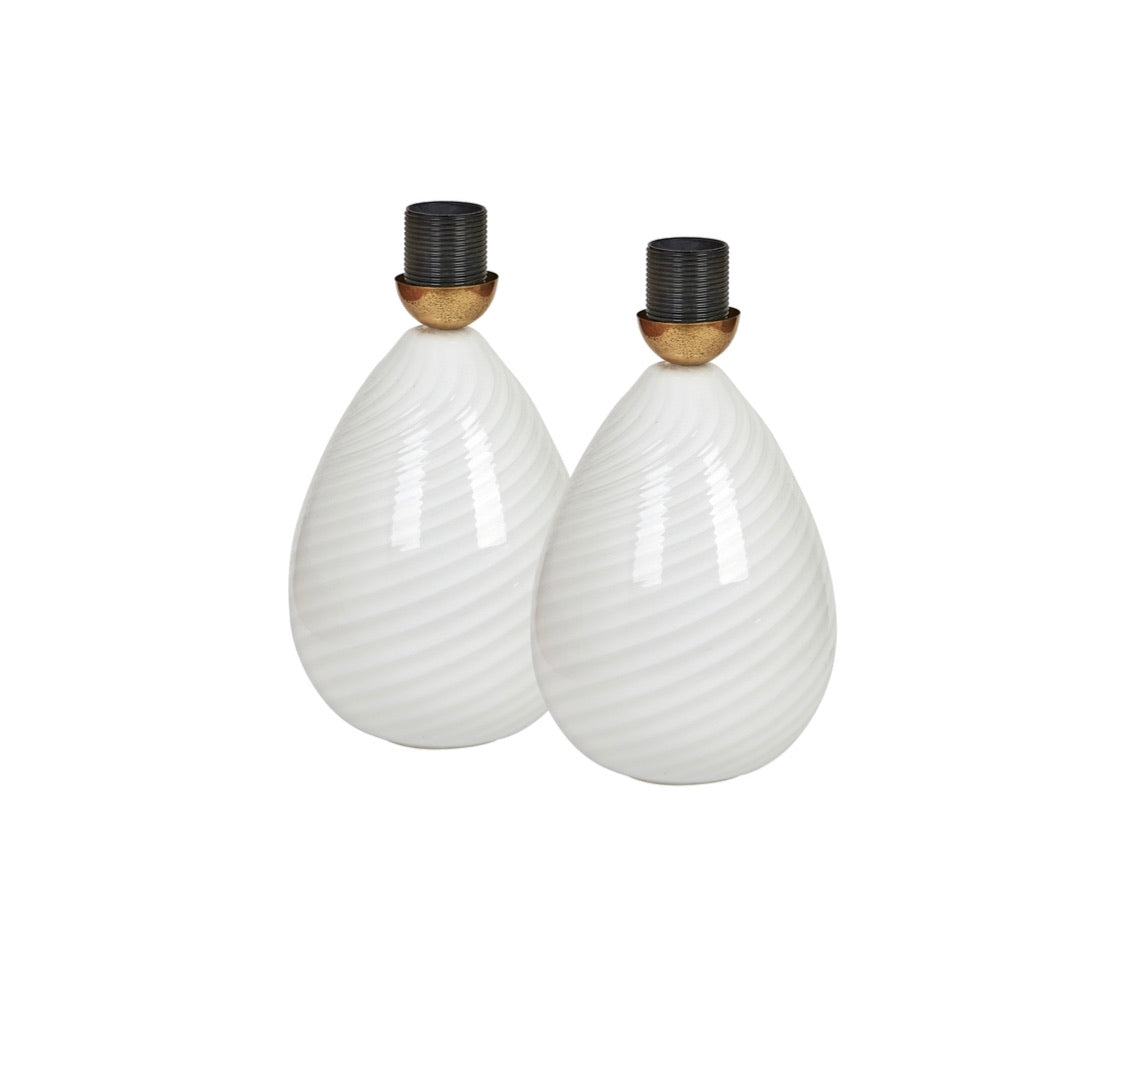 Pair of Vintage Murano Egg Bedside Lamps